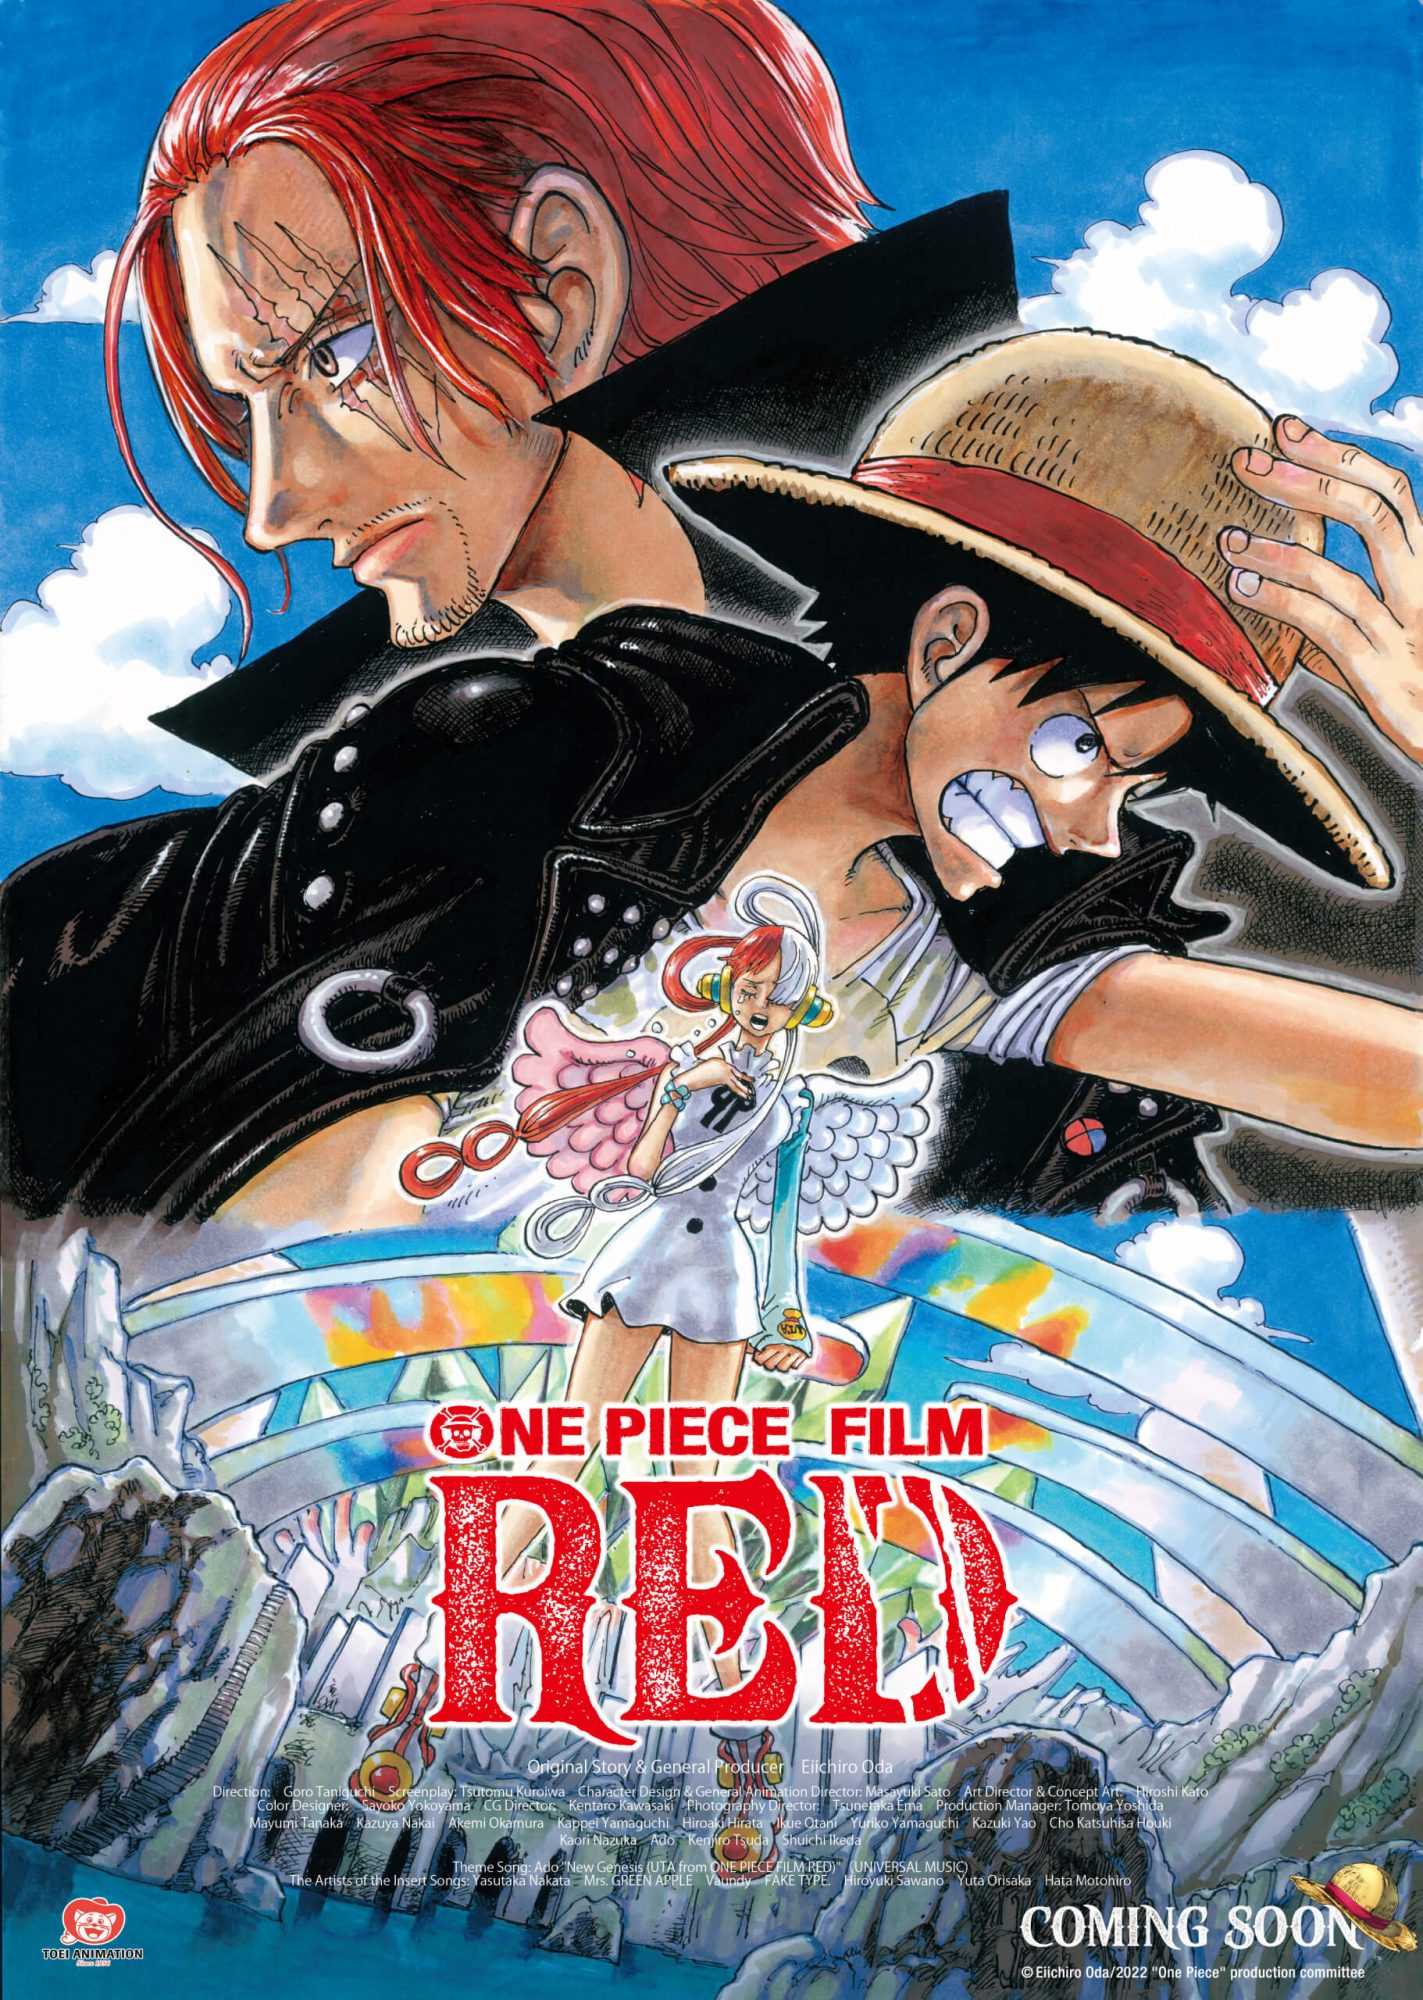 One Piece Film: Record-breaking Red, scheduled for release in Italy